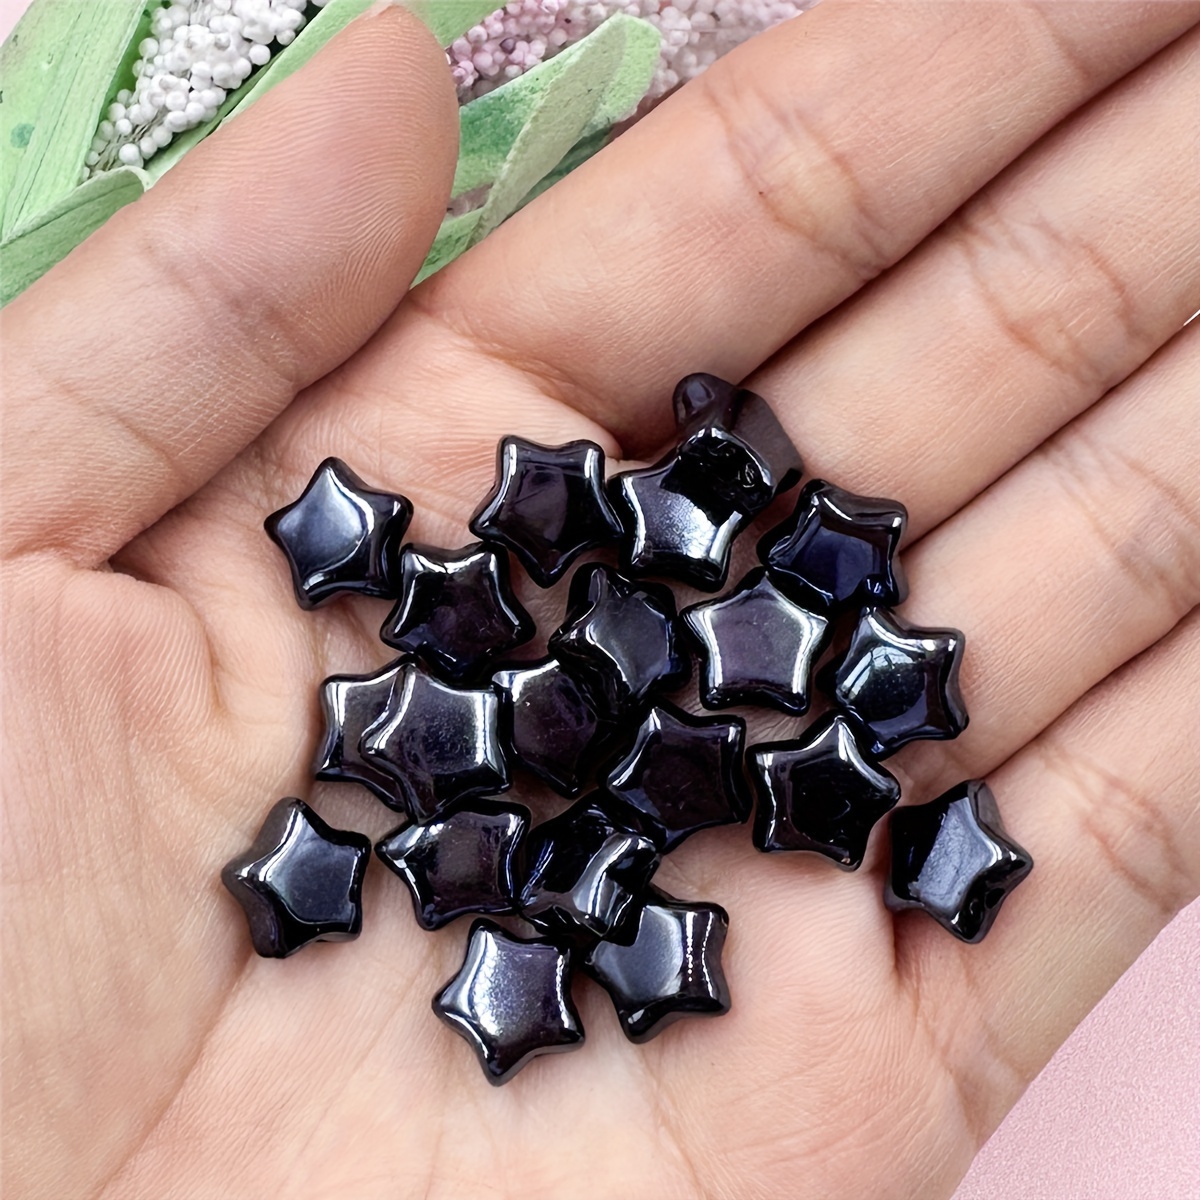 Craftdady 100pcs Transparent Random Mixed Colors Acrylic Star Spacer Beads  9x10mm Small Plastic Bead in Bead with 2mm Hole for DIY Jewelry Making